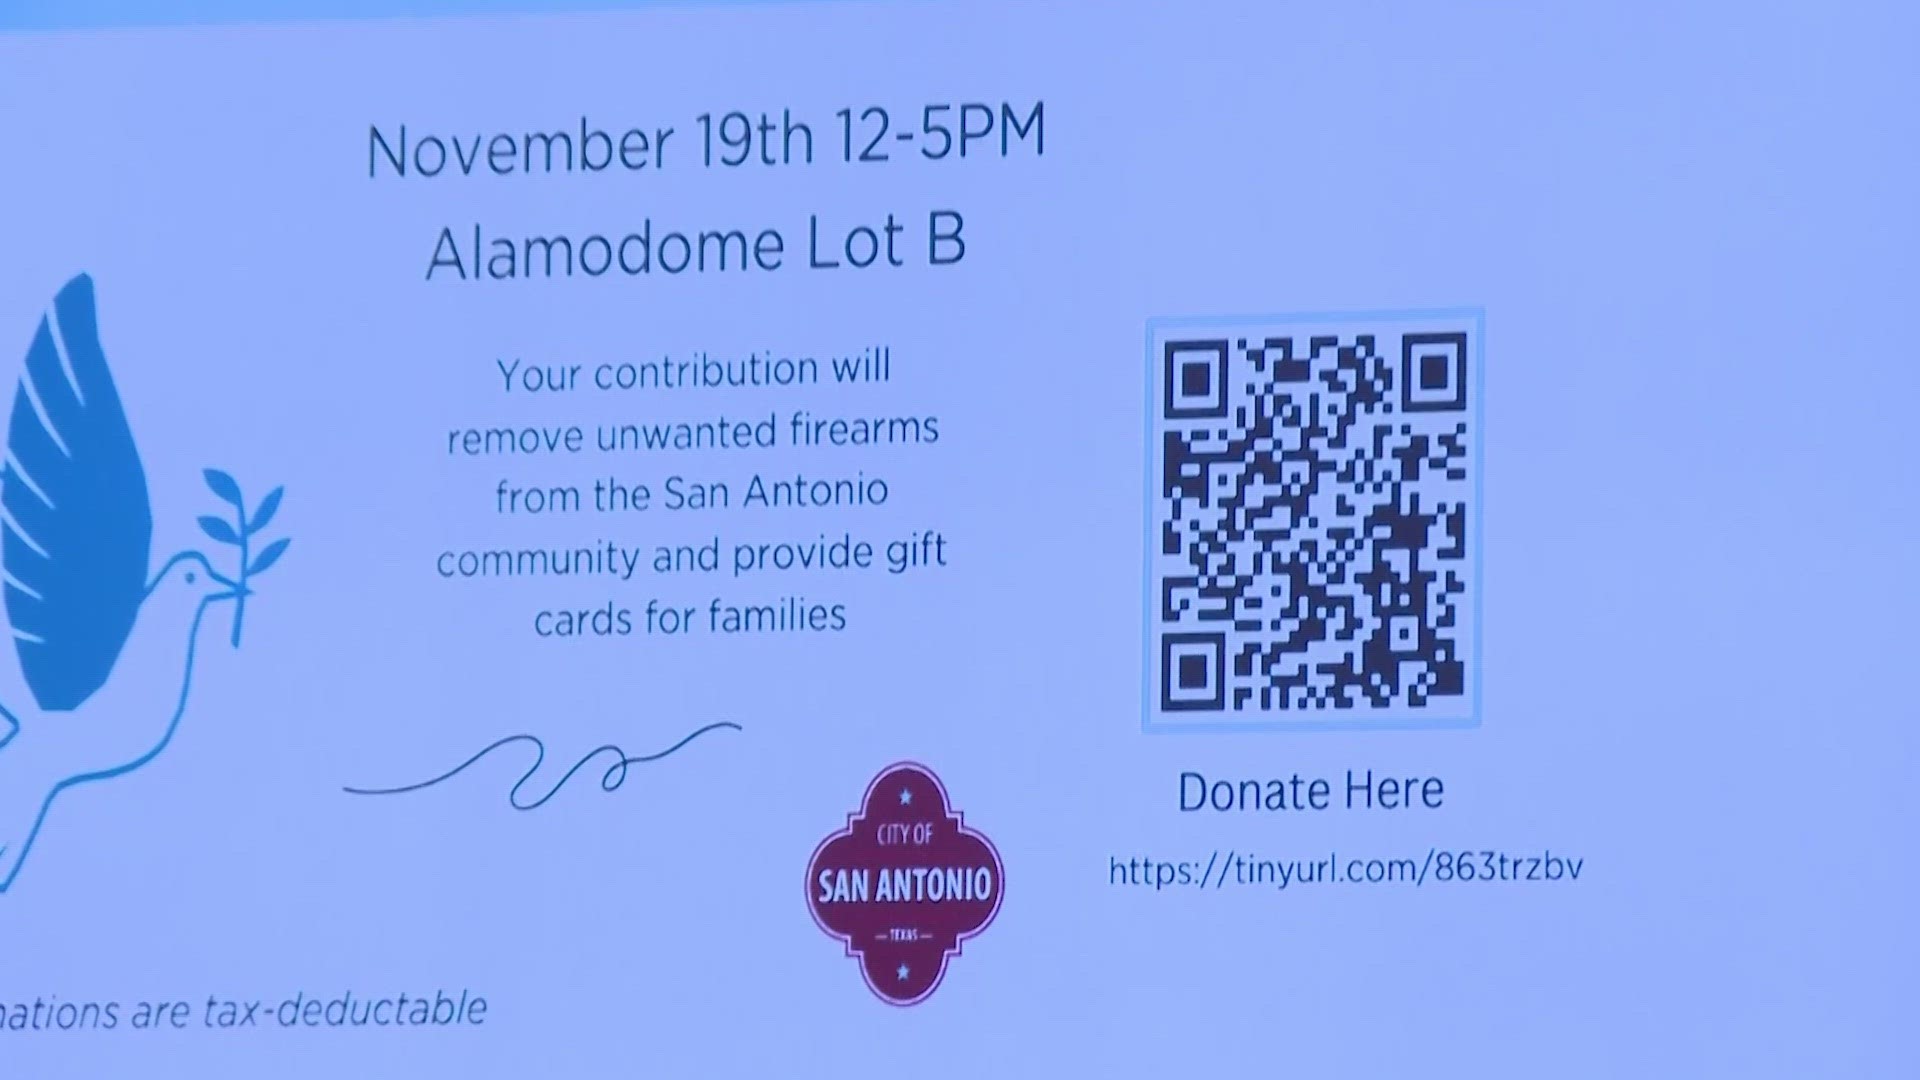 The event will allow anyone in San Antonio with a gun to safely exchange the firearm for a gift card.